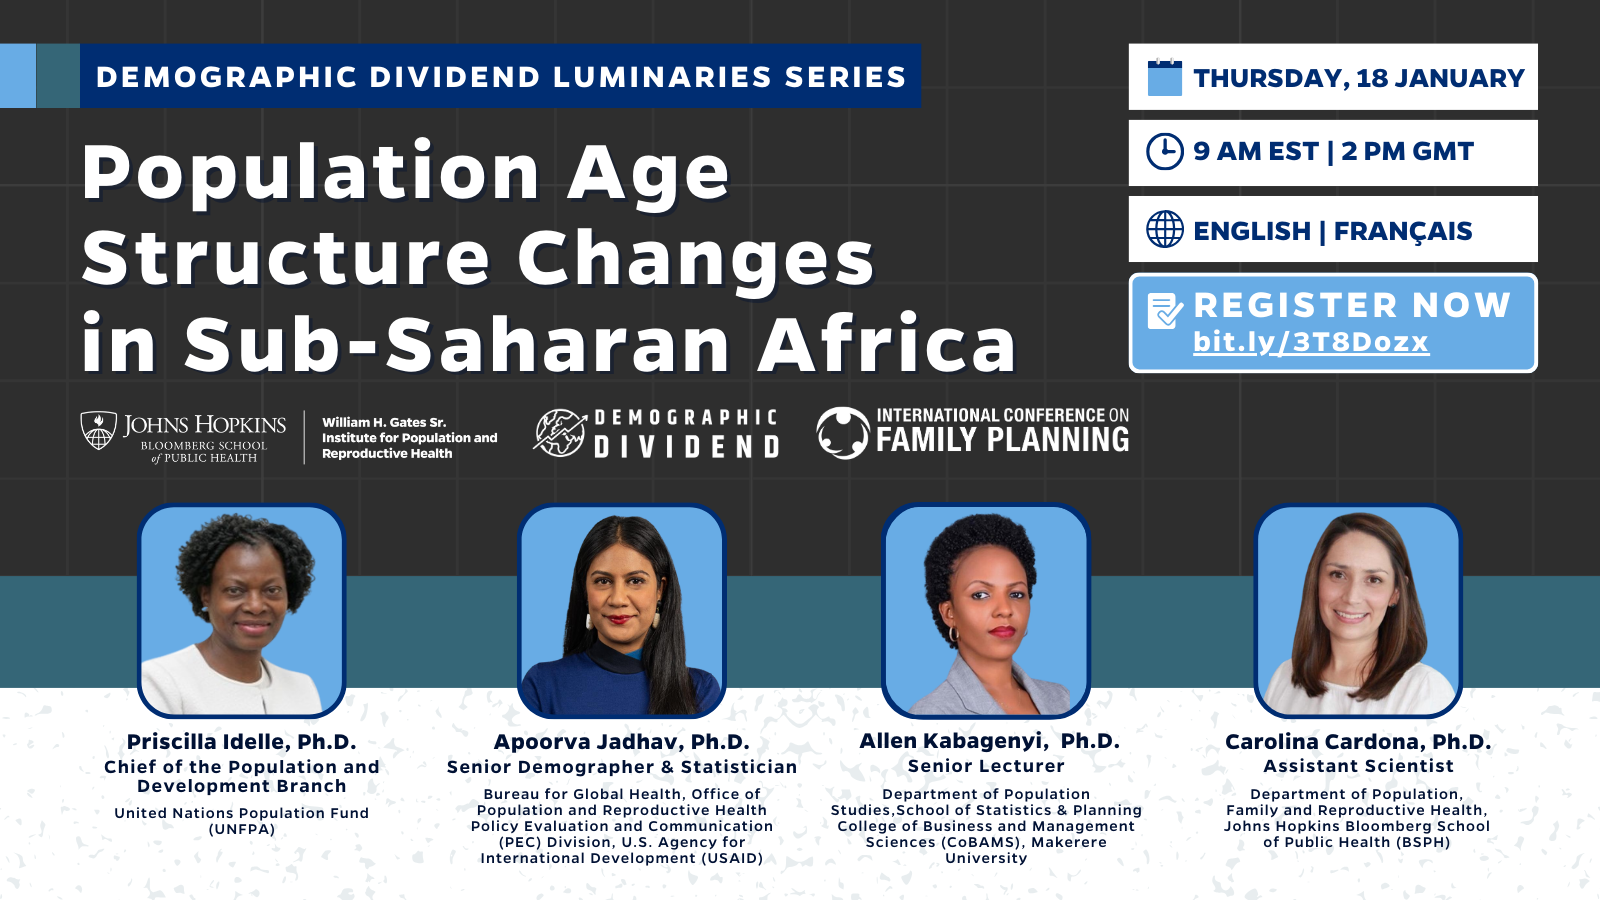 REGISTER NOW: Demographic Dividend Webinar on Population Age Structure Changes in Sub-Saharan Africa